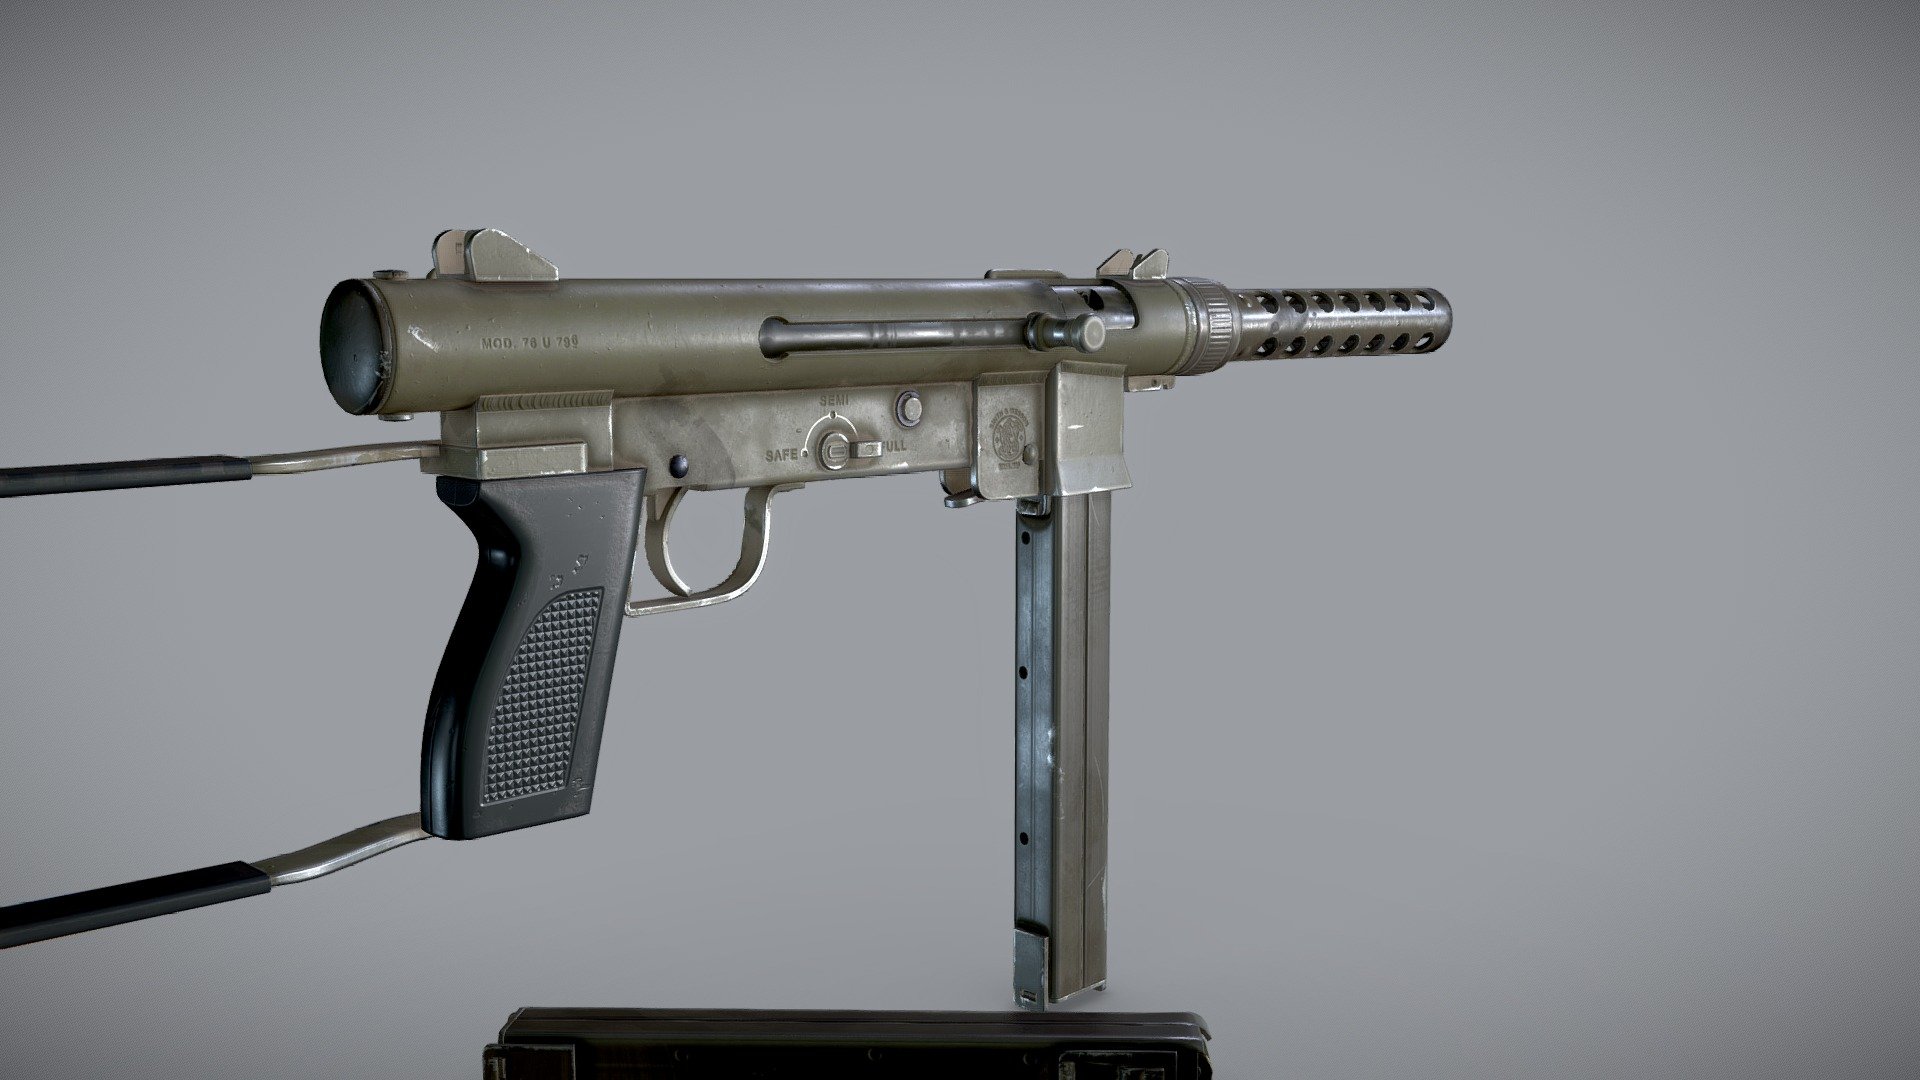 FBX Game ready model - 23.7 k tri.

Model is triangulated to preserve normal map orientation, but is eady to quadrangulate automatically.

Accurate scale, split in by moving parts: frame, trigger, slider, mag. Shoulder stock is merged but can be detached and folded.

4k PBR textures (Base Color, Metallic, AO, Normalmap, Roughness) 3d model